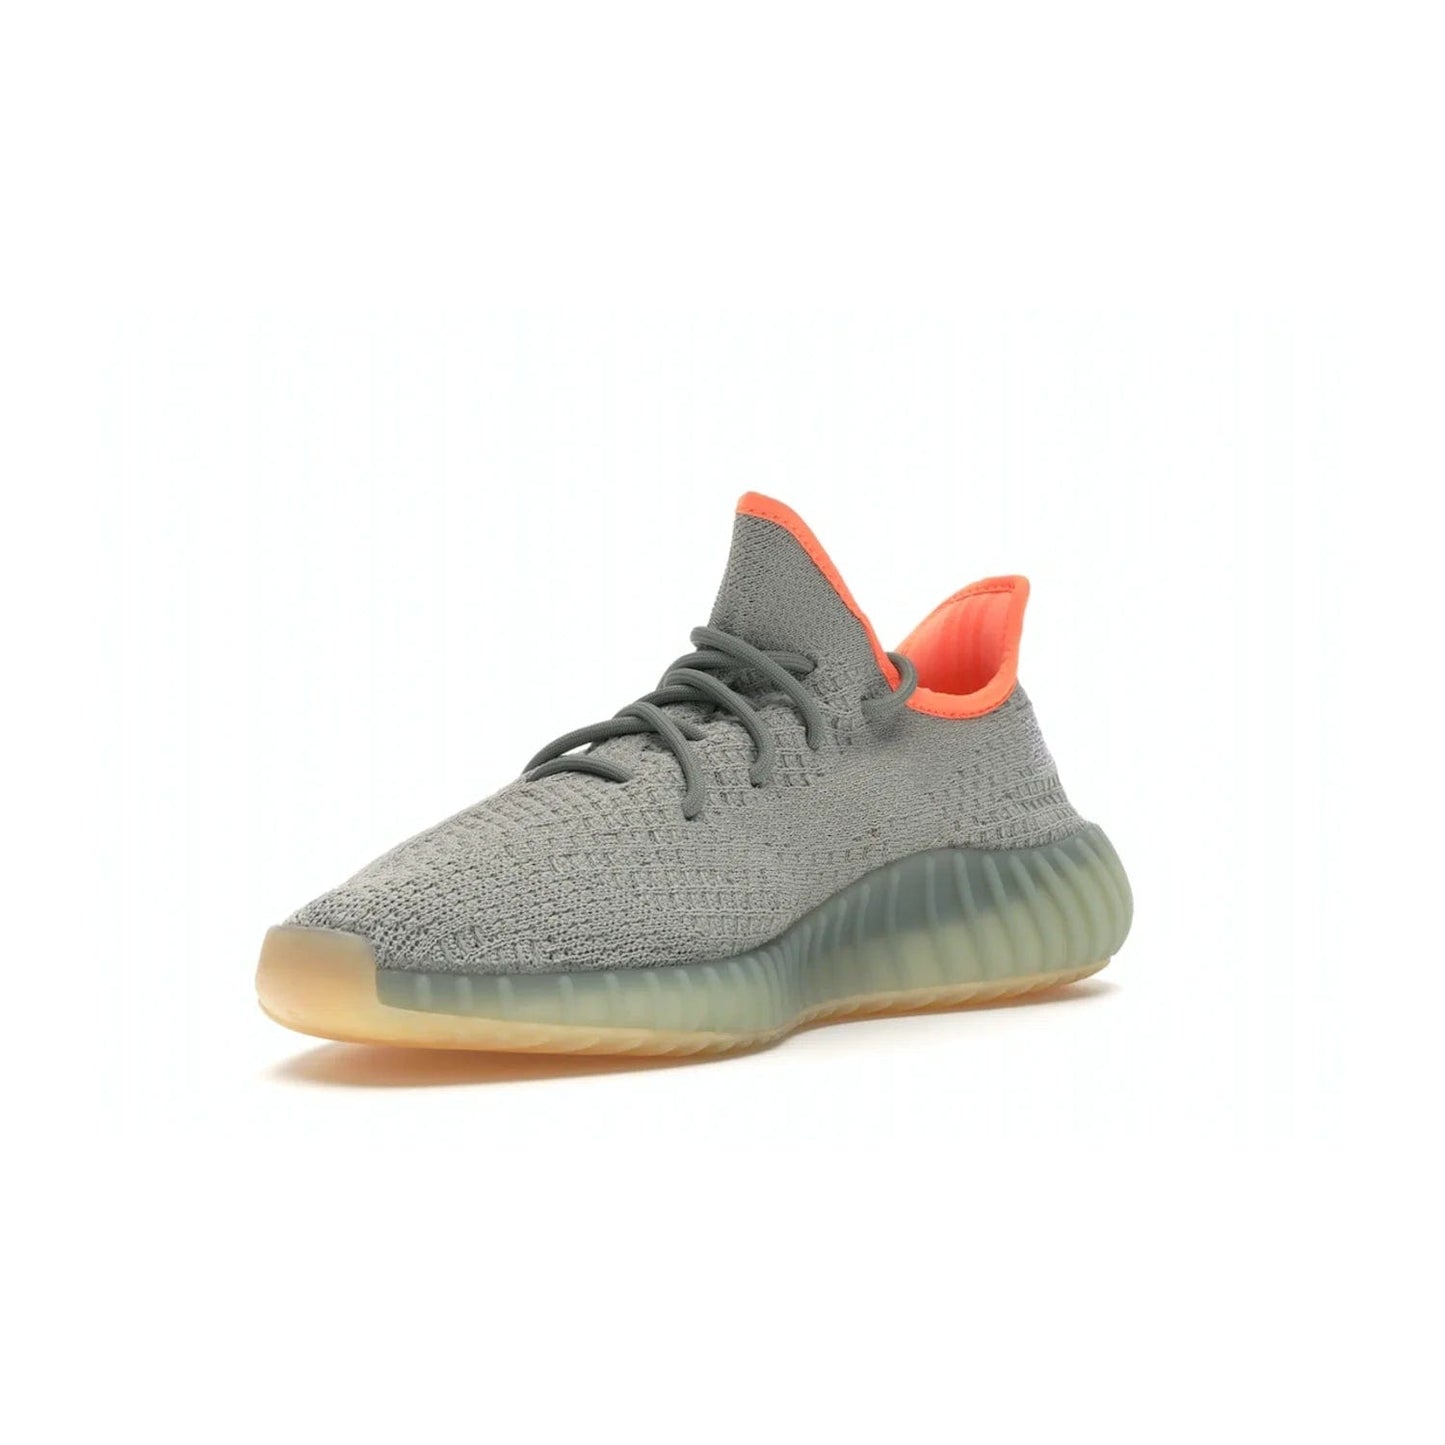 adidas Yeezy Boost 350 V2 Desert Sage - Image 14 - Only at www.BallersClubKickz.com - Upgrade your style with the adidas Yeezy Boost 350 V2 Desert Sage. This 350V2 features a Desert Sage primeknit upper with tonal side stripe, and an orange-highlighted translucent Boost cushioning sole. Stay on-trend in effortless style.